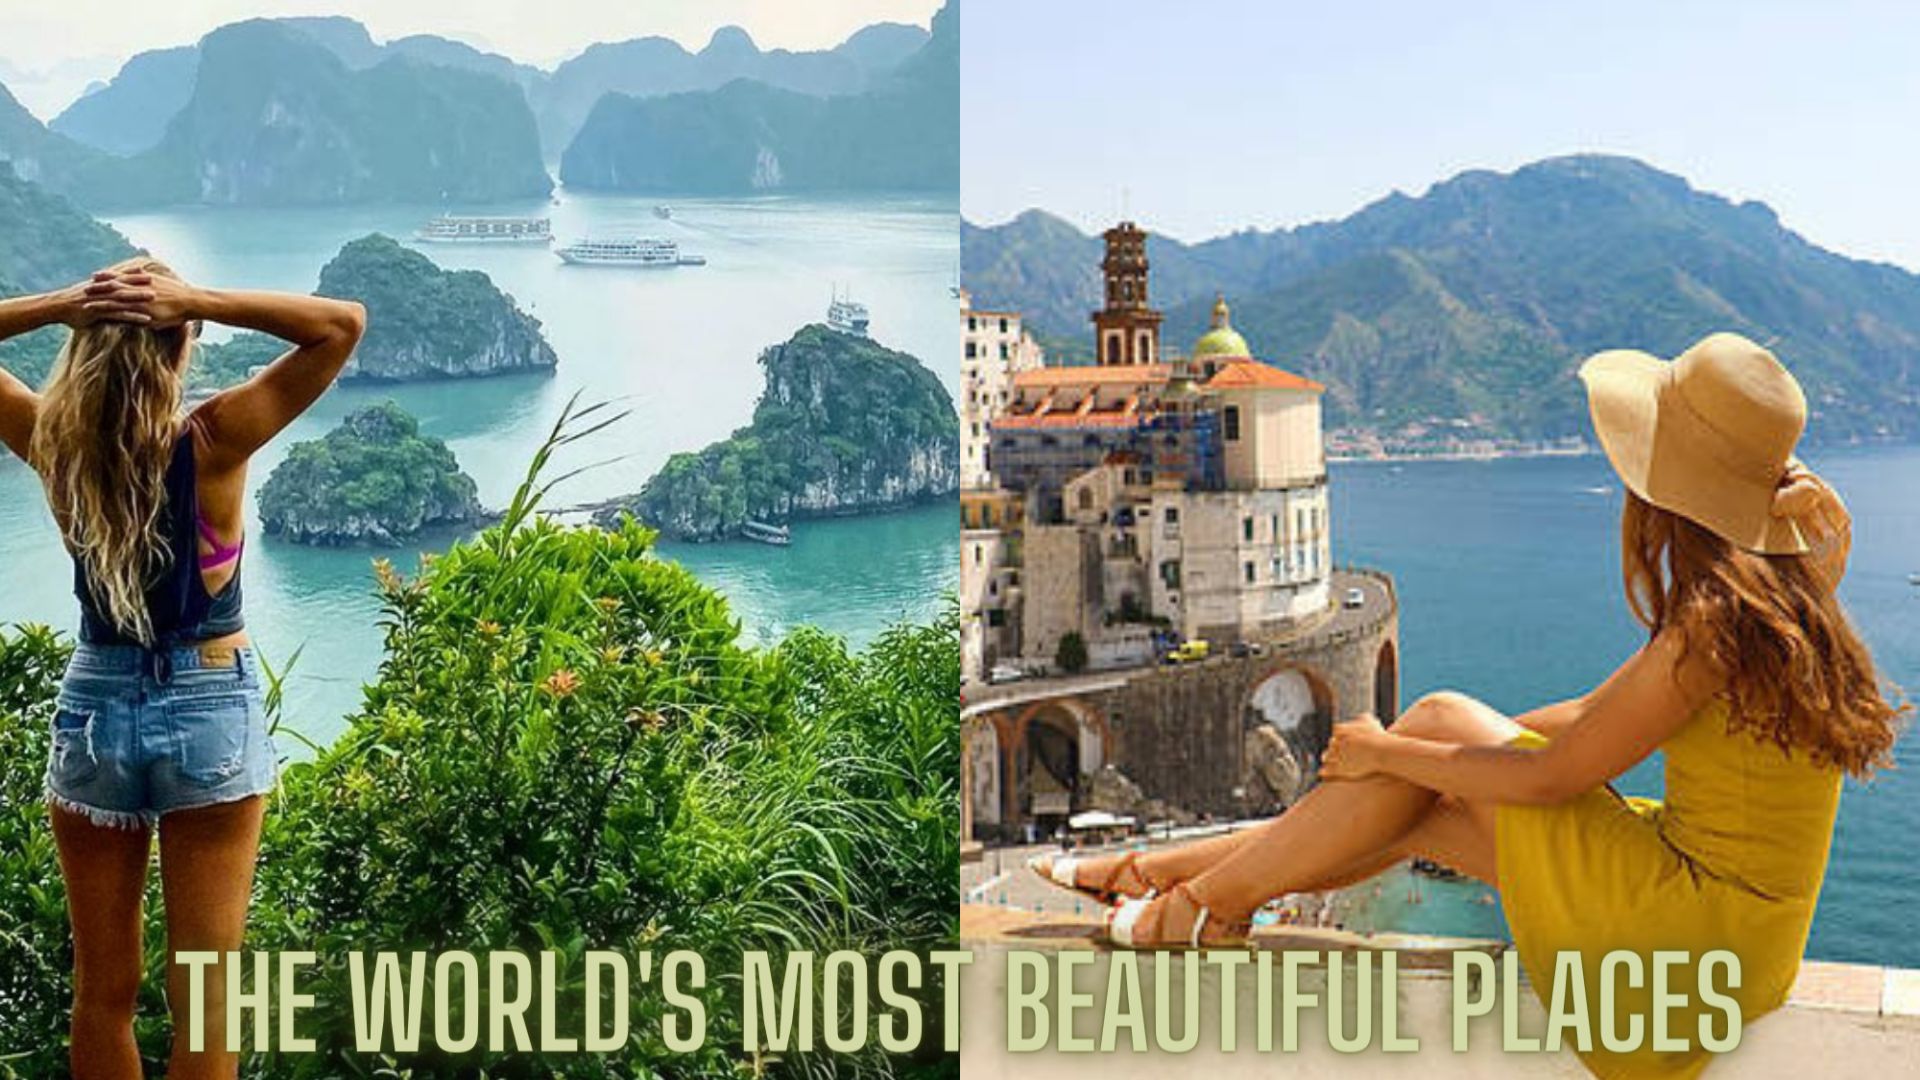 The World's Most Beautiful places